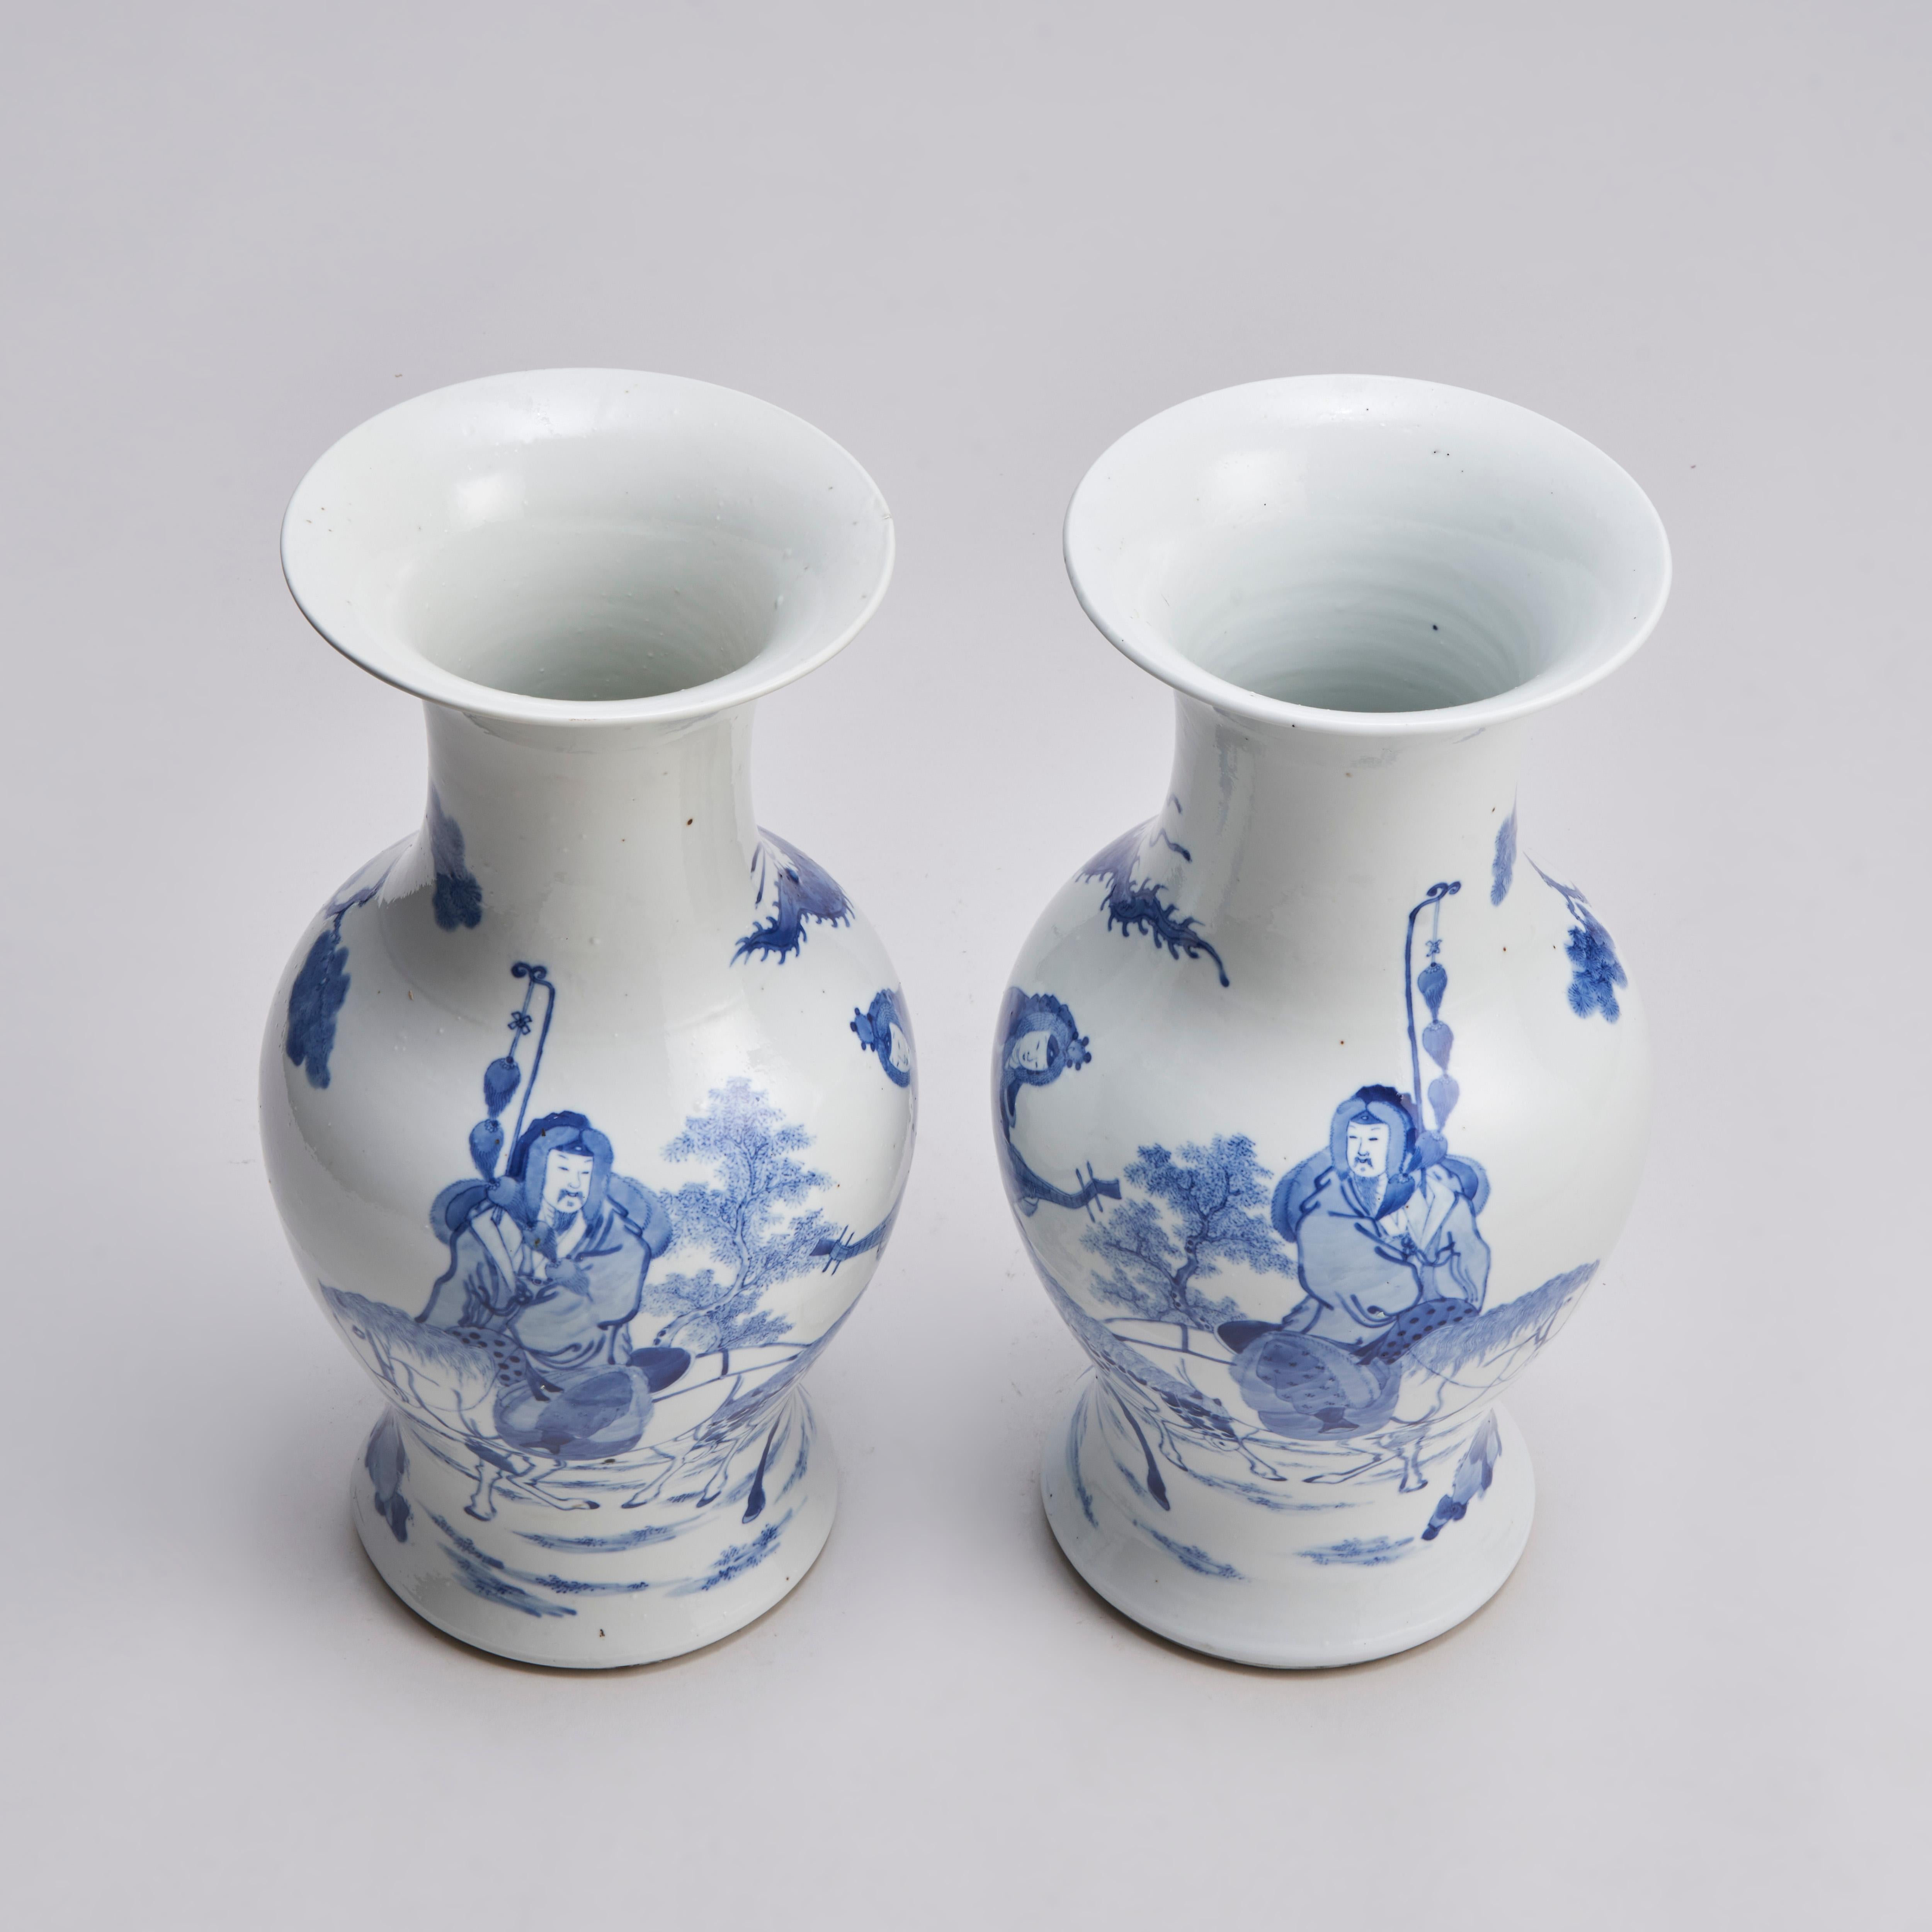 A pair of well proportioned 19th century Chinese blue and white Phoenix-tail vases with finely painted mirrored decoration of a sage and a lady on a speckled horse. The lady carries a bBiwa and wears a headdress which suggests that she may be a